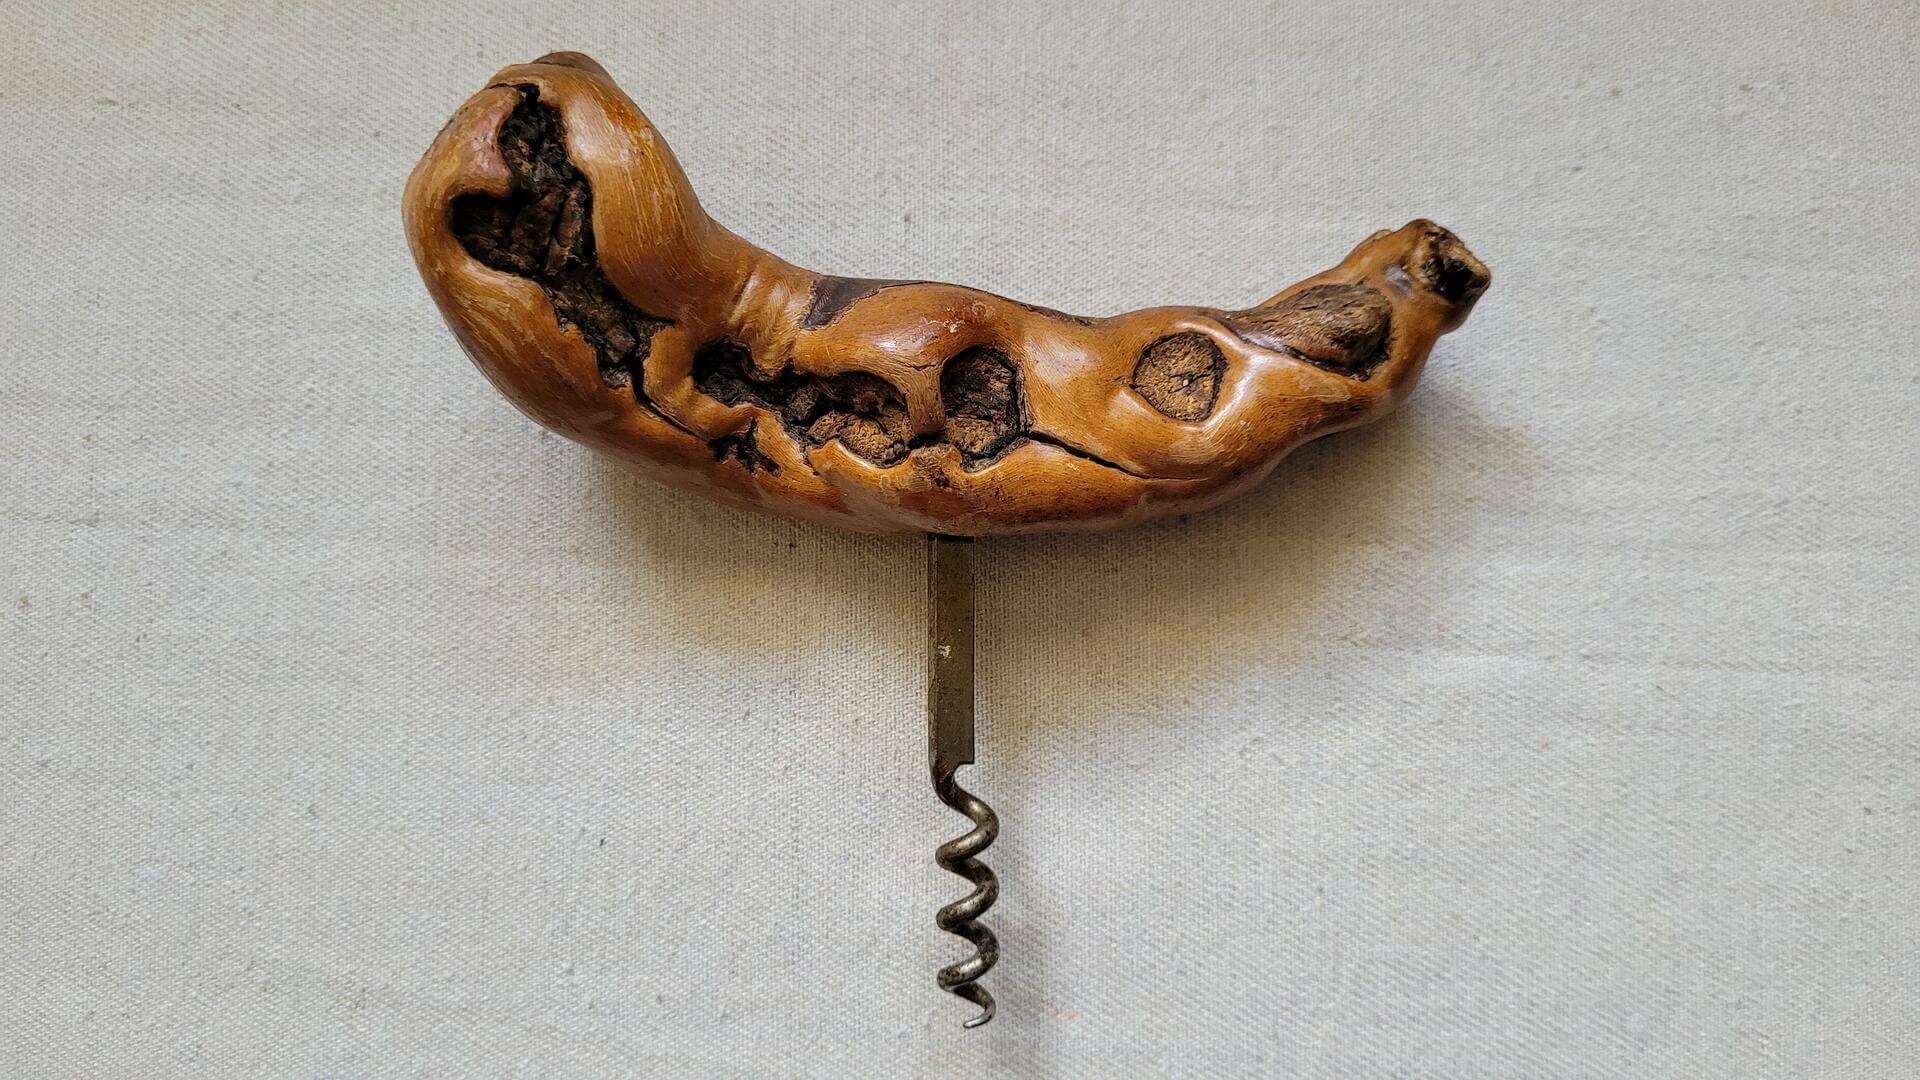 Beautiful French mid century hand made Laurent Siret Rochefort S Loire grape vine root corkscrew. vintage made in France burl cork crew breweriana and barware collectible